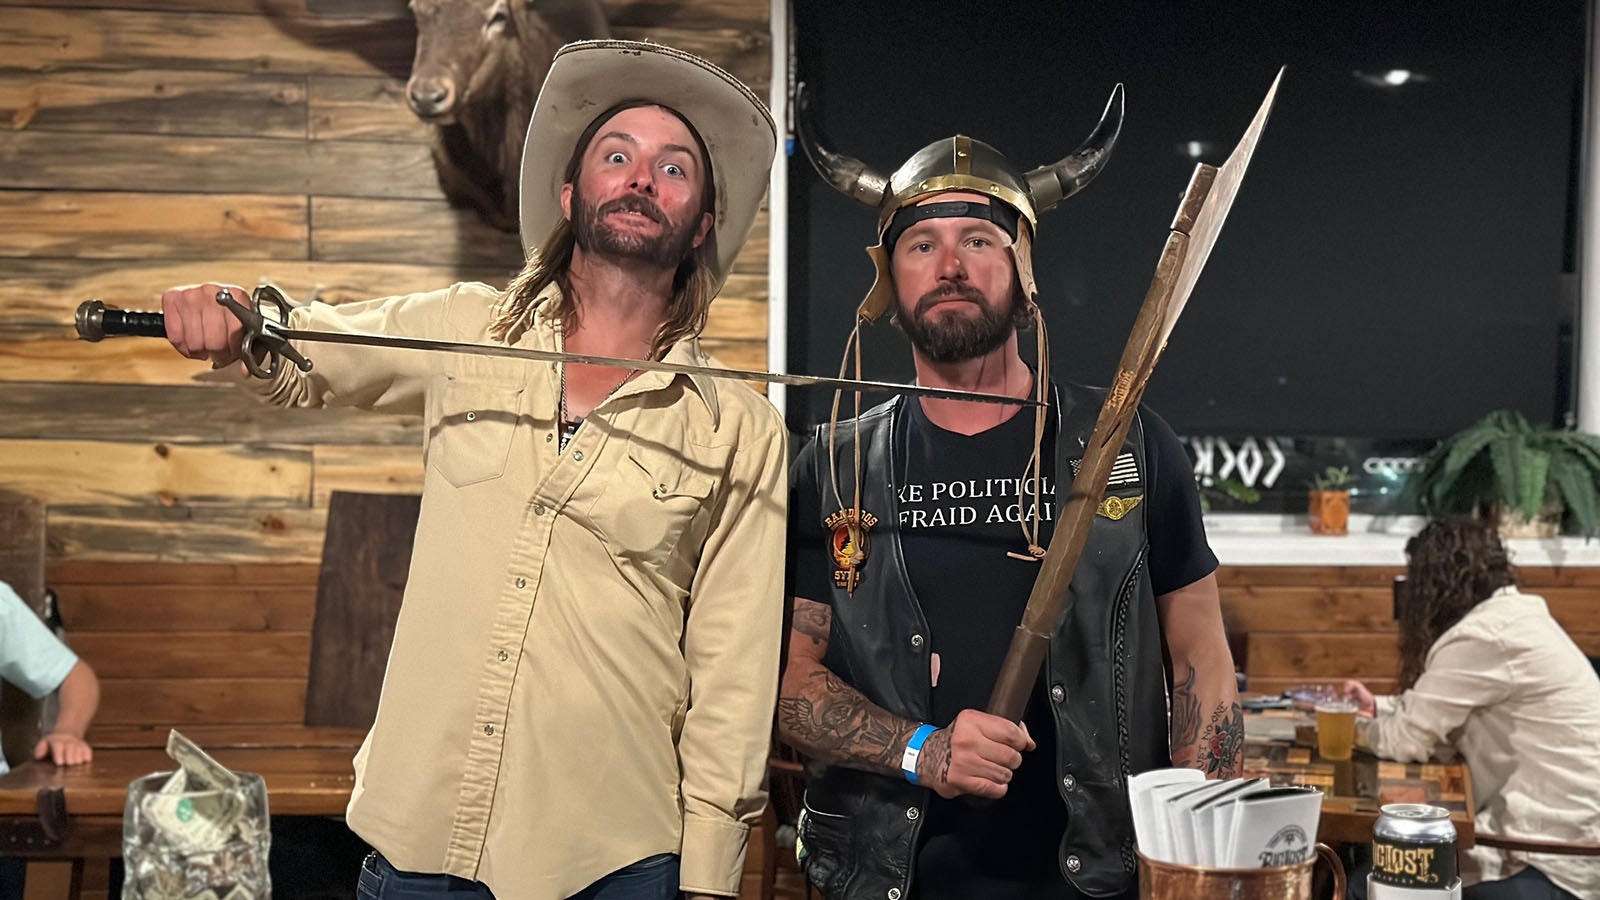 Party like a Viking — or even a cowboy Viking — at Big Lost Meadery in Gillette, Wyoming.